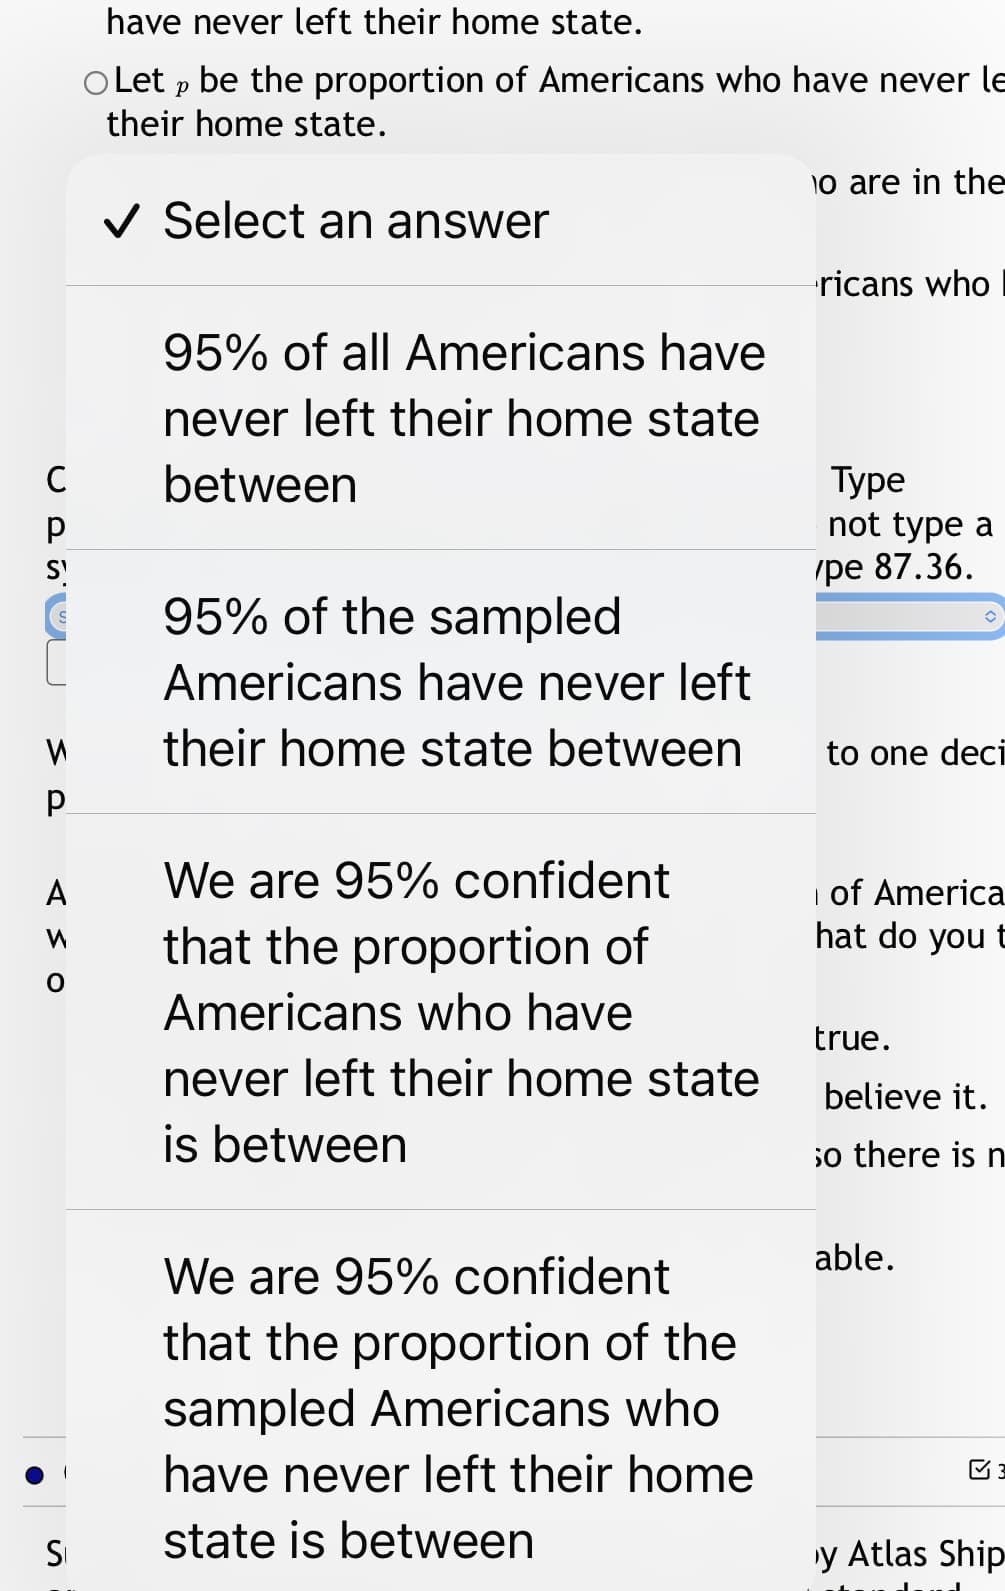 have never left their home state.
O Let p be the proportion of Americans who have never le
their home state.
o are in the
V Select an answer
ricans who
95% of all Americans have
never left their home state
C
between
Туре
not type a
S
(ре 87.36.
95% of the sampled
Americans have never left
their home state between
to one deci
We are 95% confident
i of America
hat do you t
A
that the proportion of
Americans who have
true.
never left their home state
believe it.
is between
so there is n
able.
We are 95% confident
that the proportion of the
sampled Americans who
have never left their home
SI
state is between
y Atlas Ship
